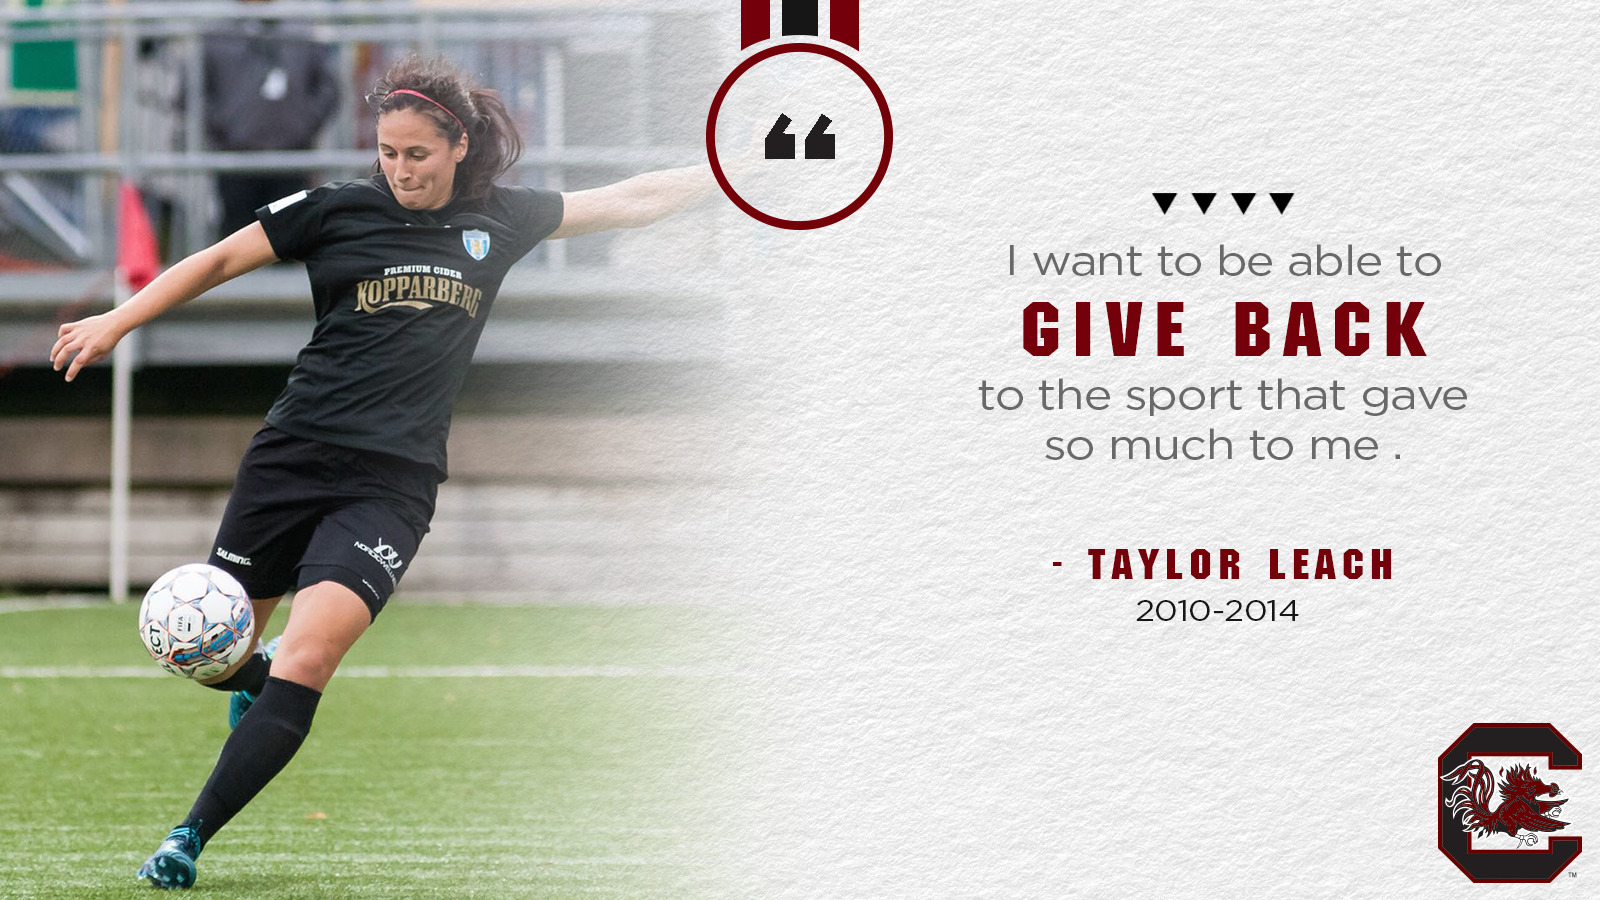 Catching Up with Taylor Leach